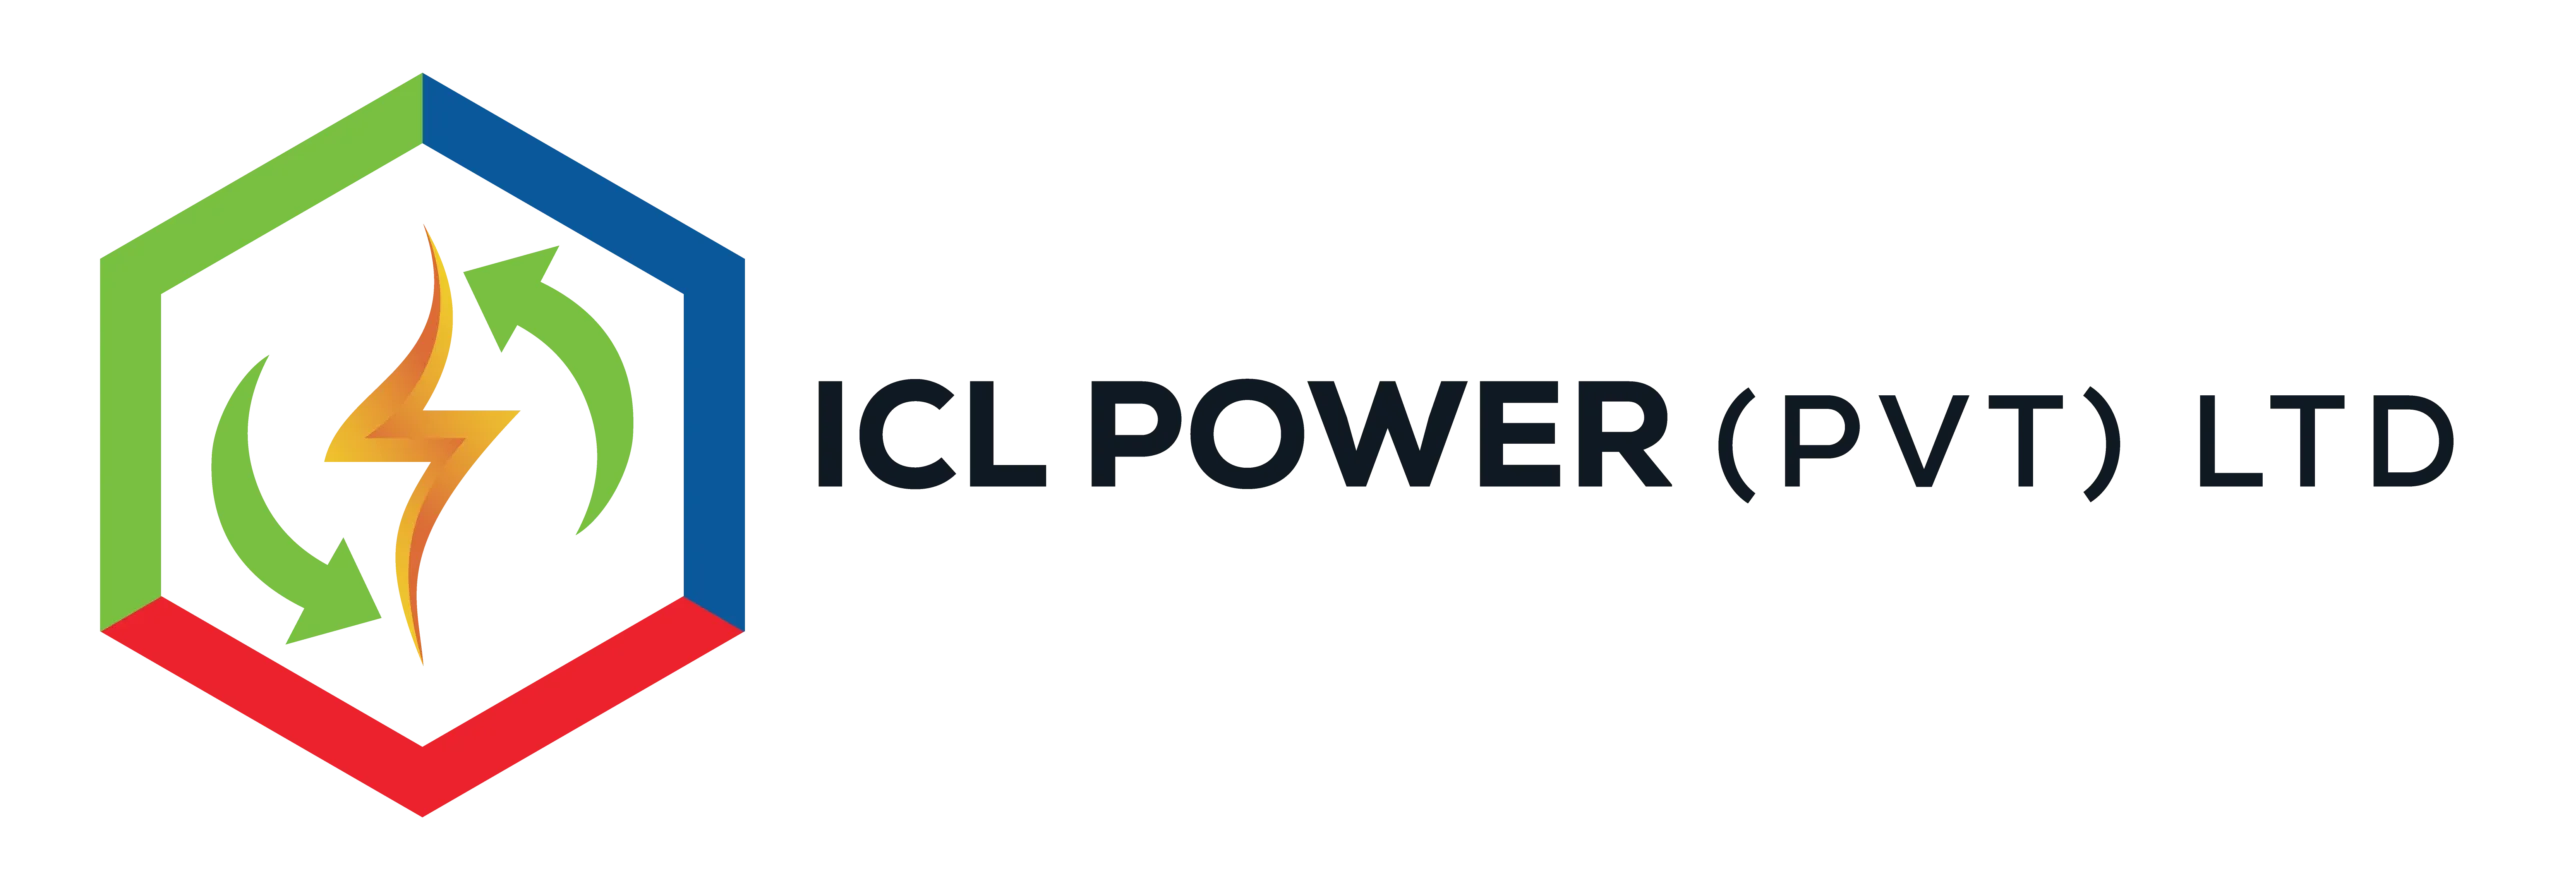 ICL-Power